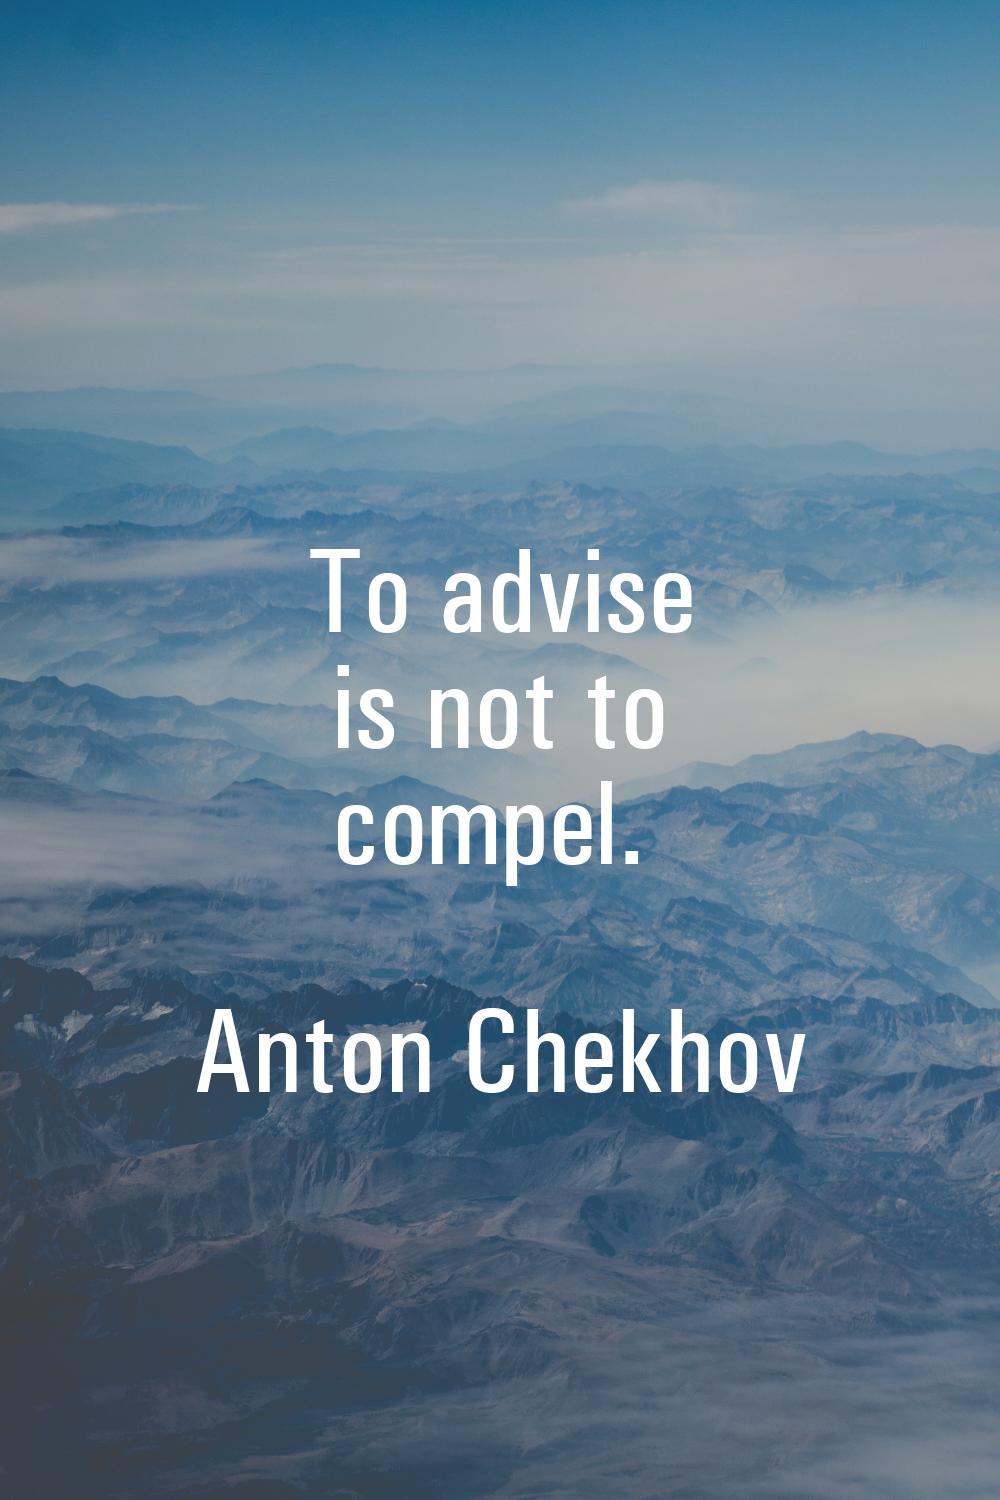 To advise is not to compel.